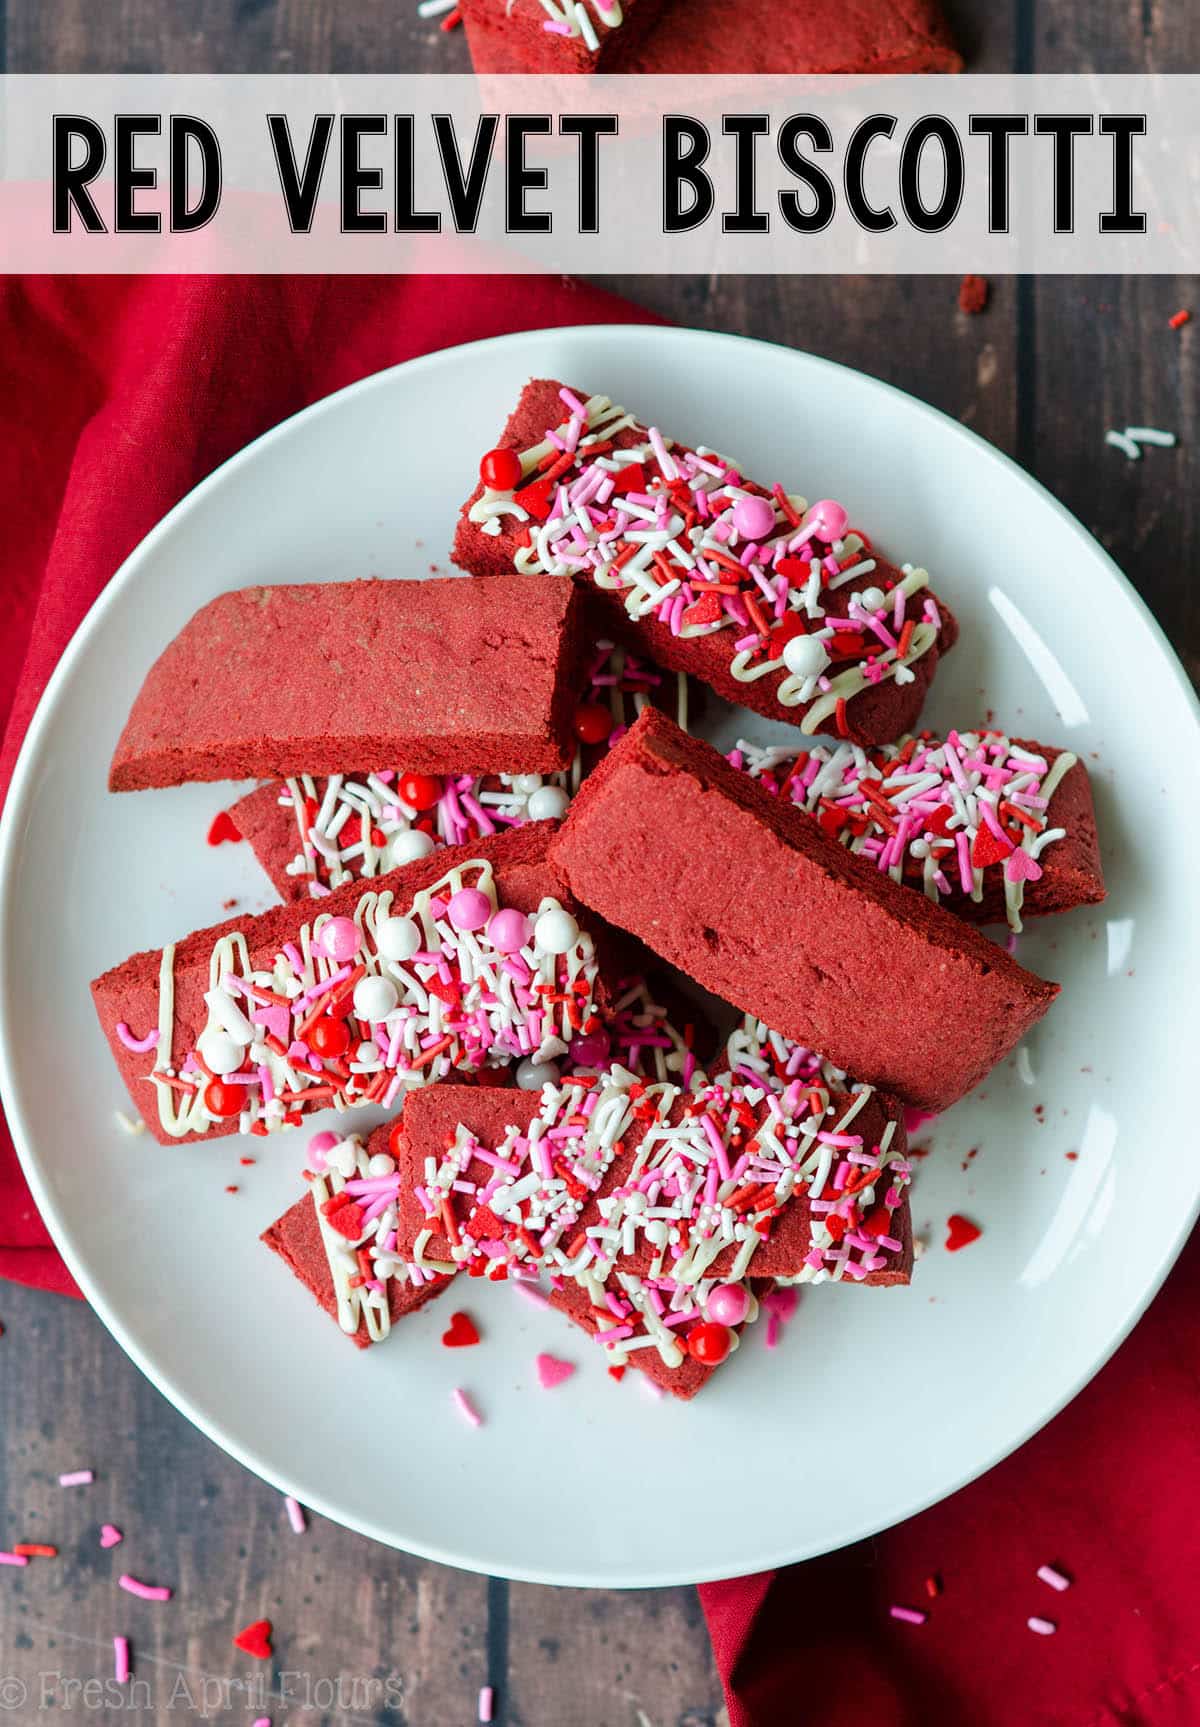 A Valentine's Day twist on classic biscotti using red velvet cake mix. via @frshaprilflours